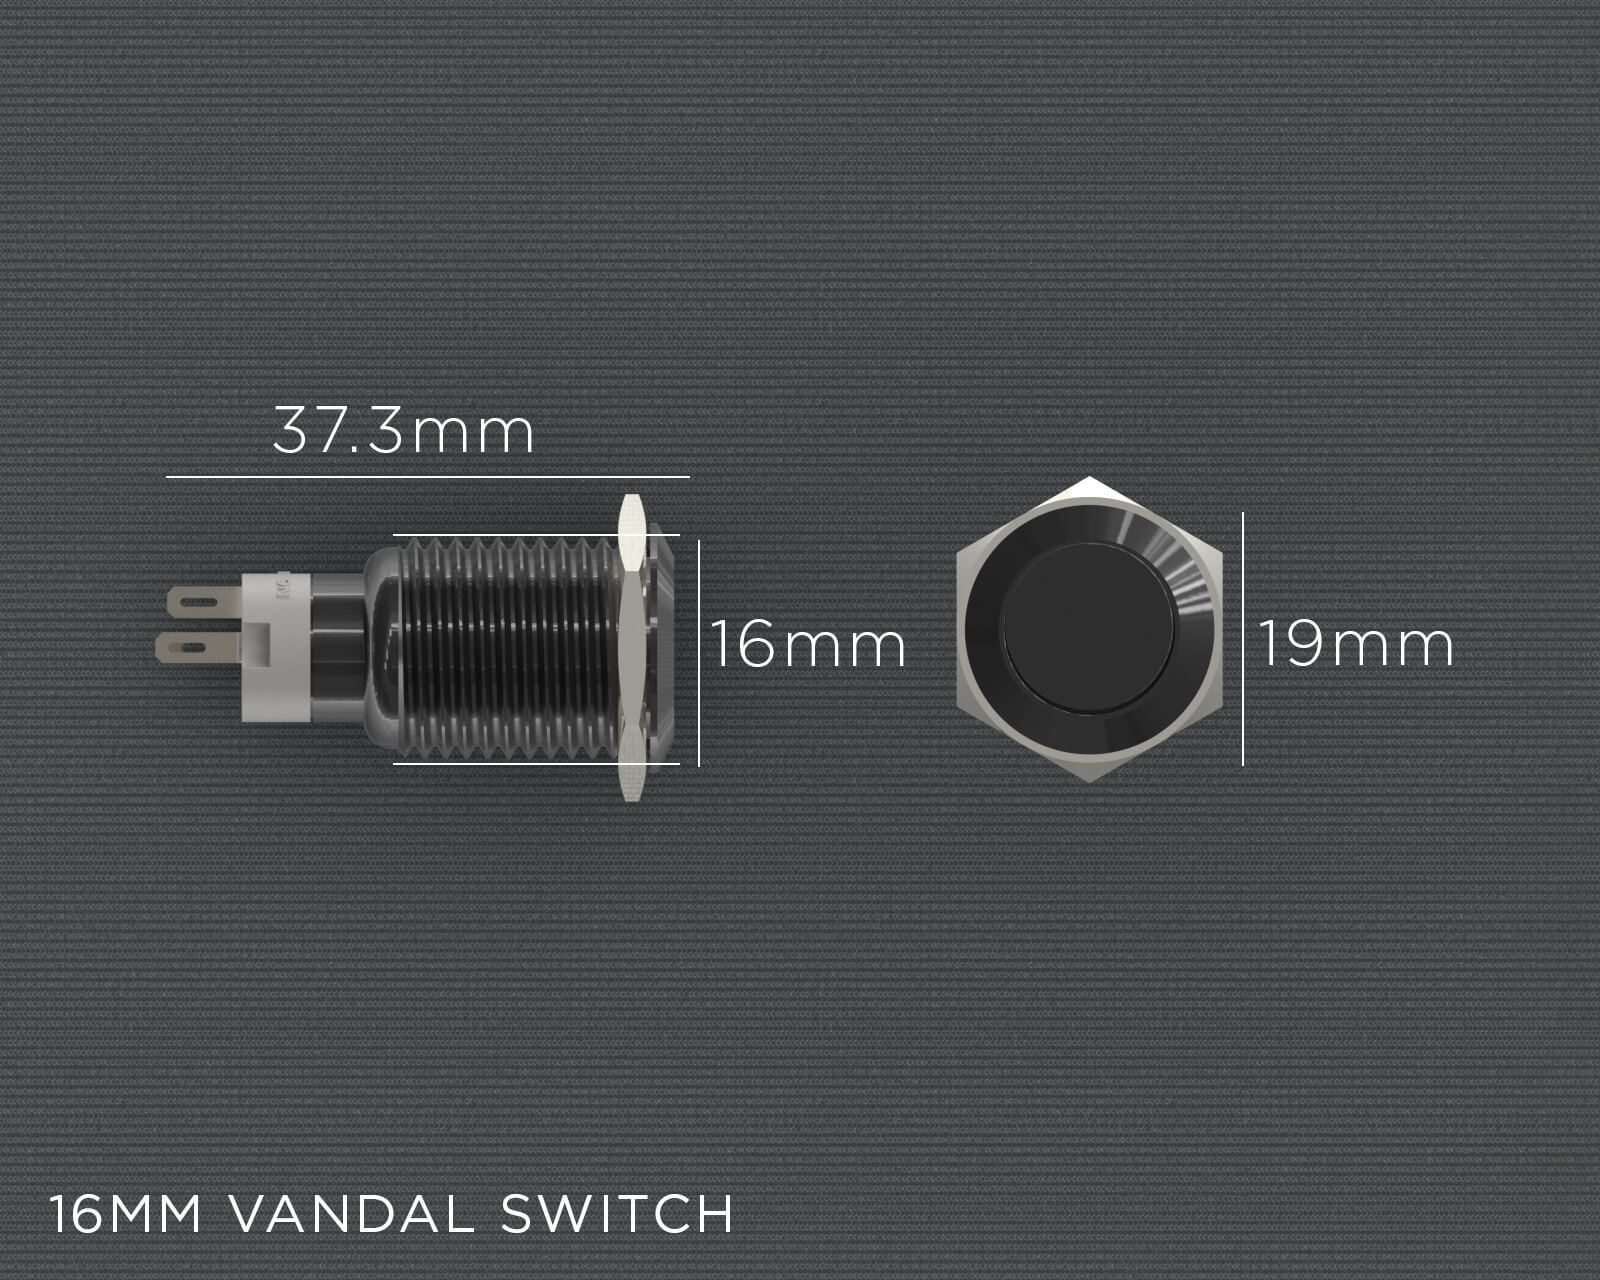 PrimoChill Black Aluminum Latching Vandal Resistant Switch - 16mm - PrimoChill - KEEPING IT COOL